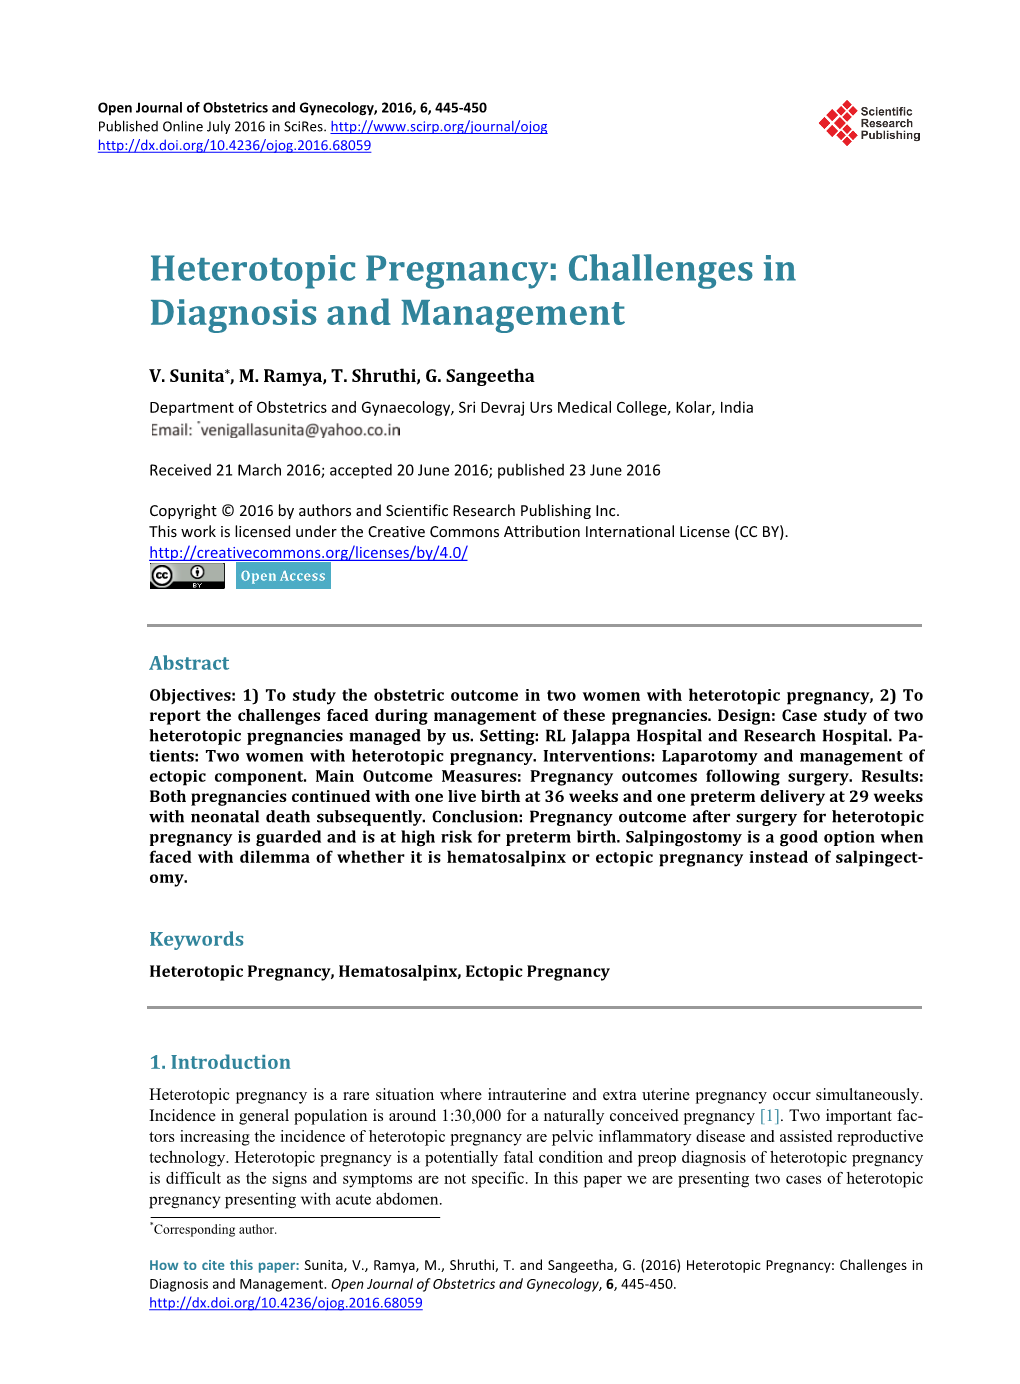 Heterotopic Pregnancy: Challenges in Diagnosis and Management